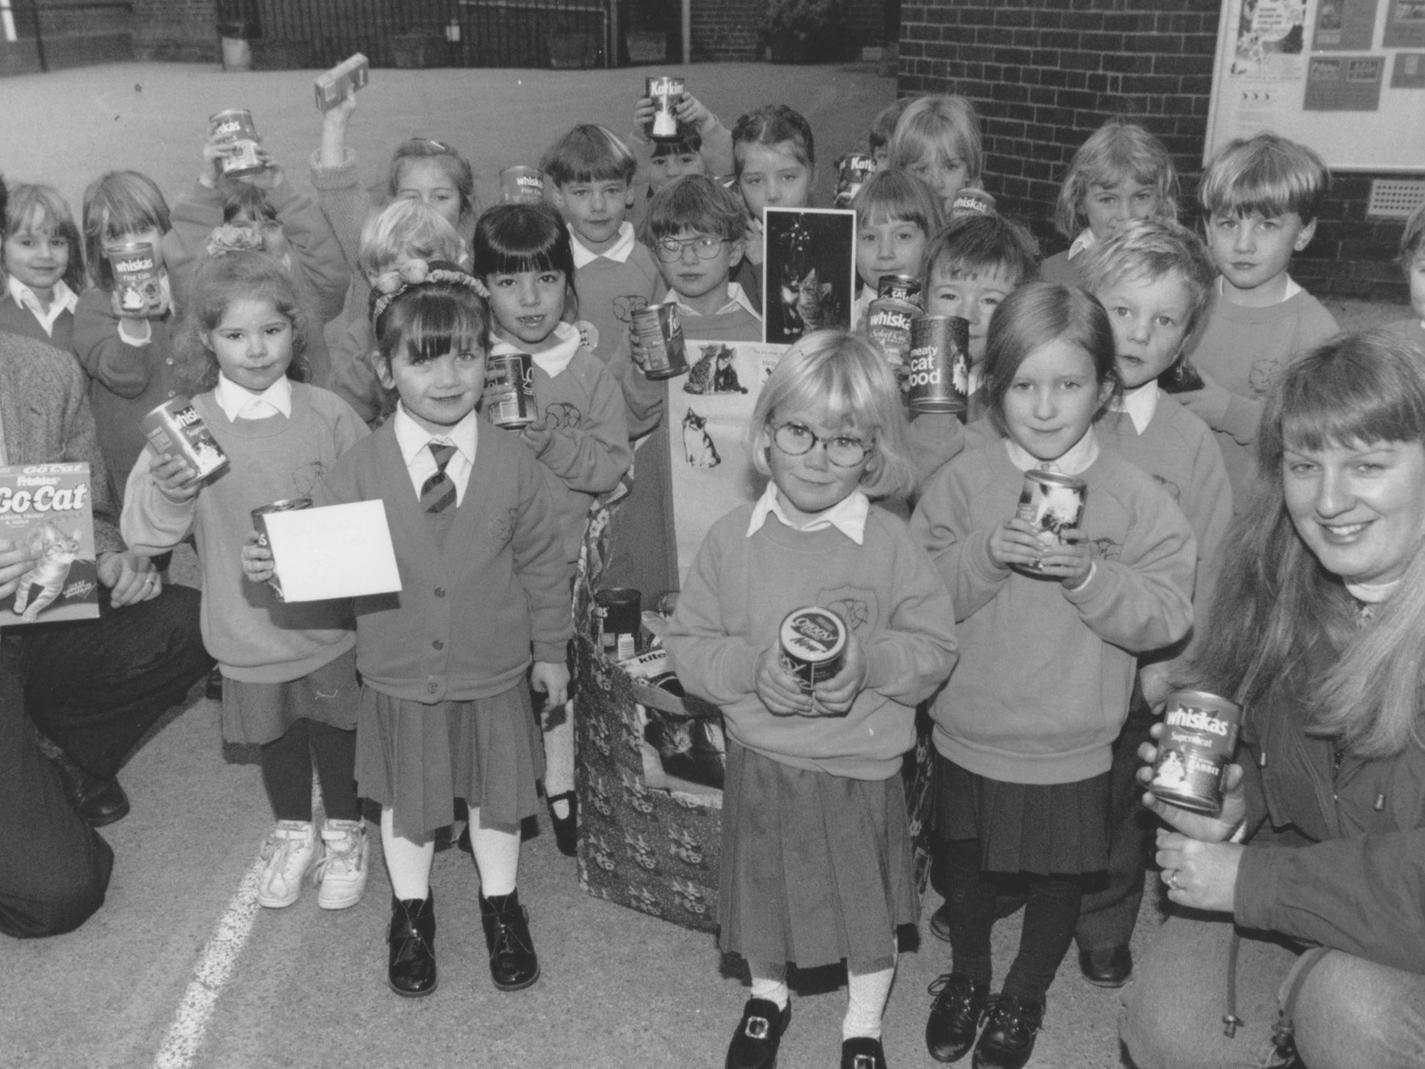 Children from Gladstone Road Junior and Infant School held a collection of tinned cat foods at their school in December 1995. The Infants are pictured with some of the tinned cat foods and their teacher Mark Thompson and his wife Sue, who organised the collection.